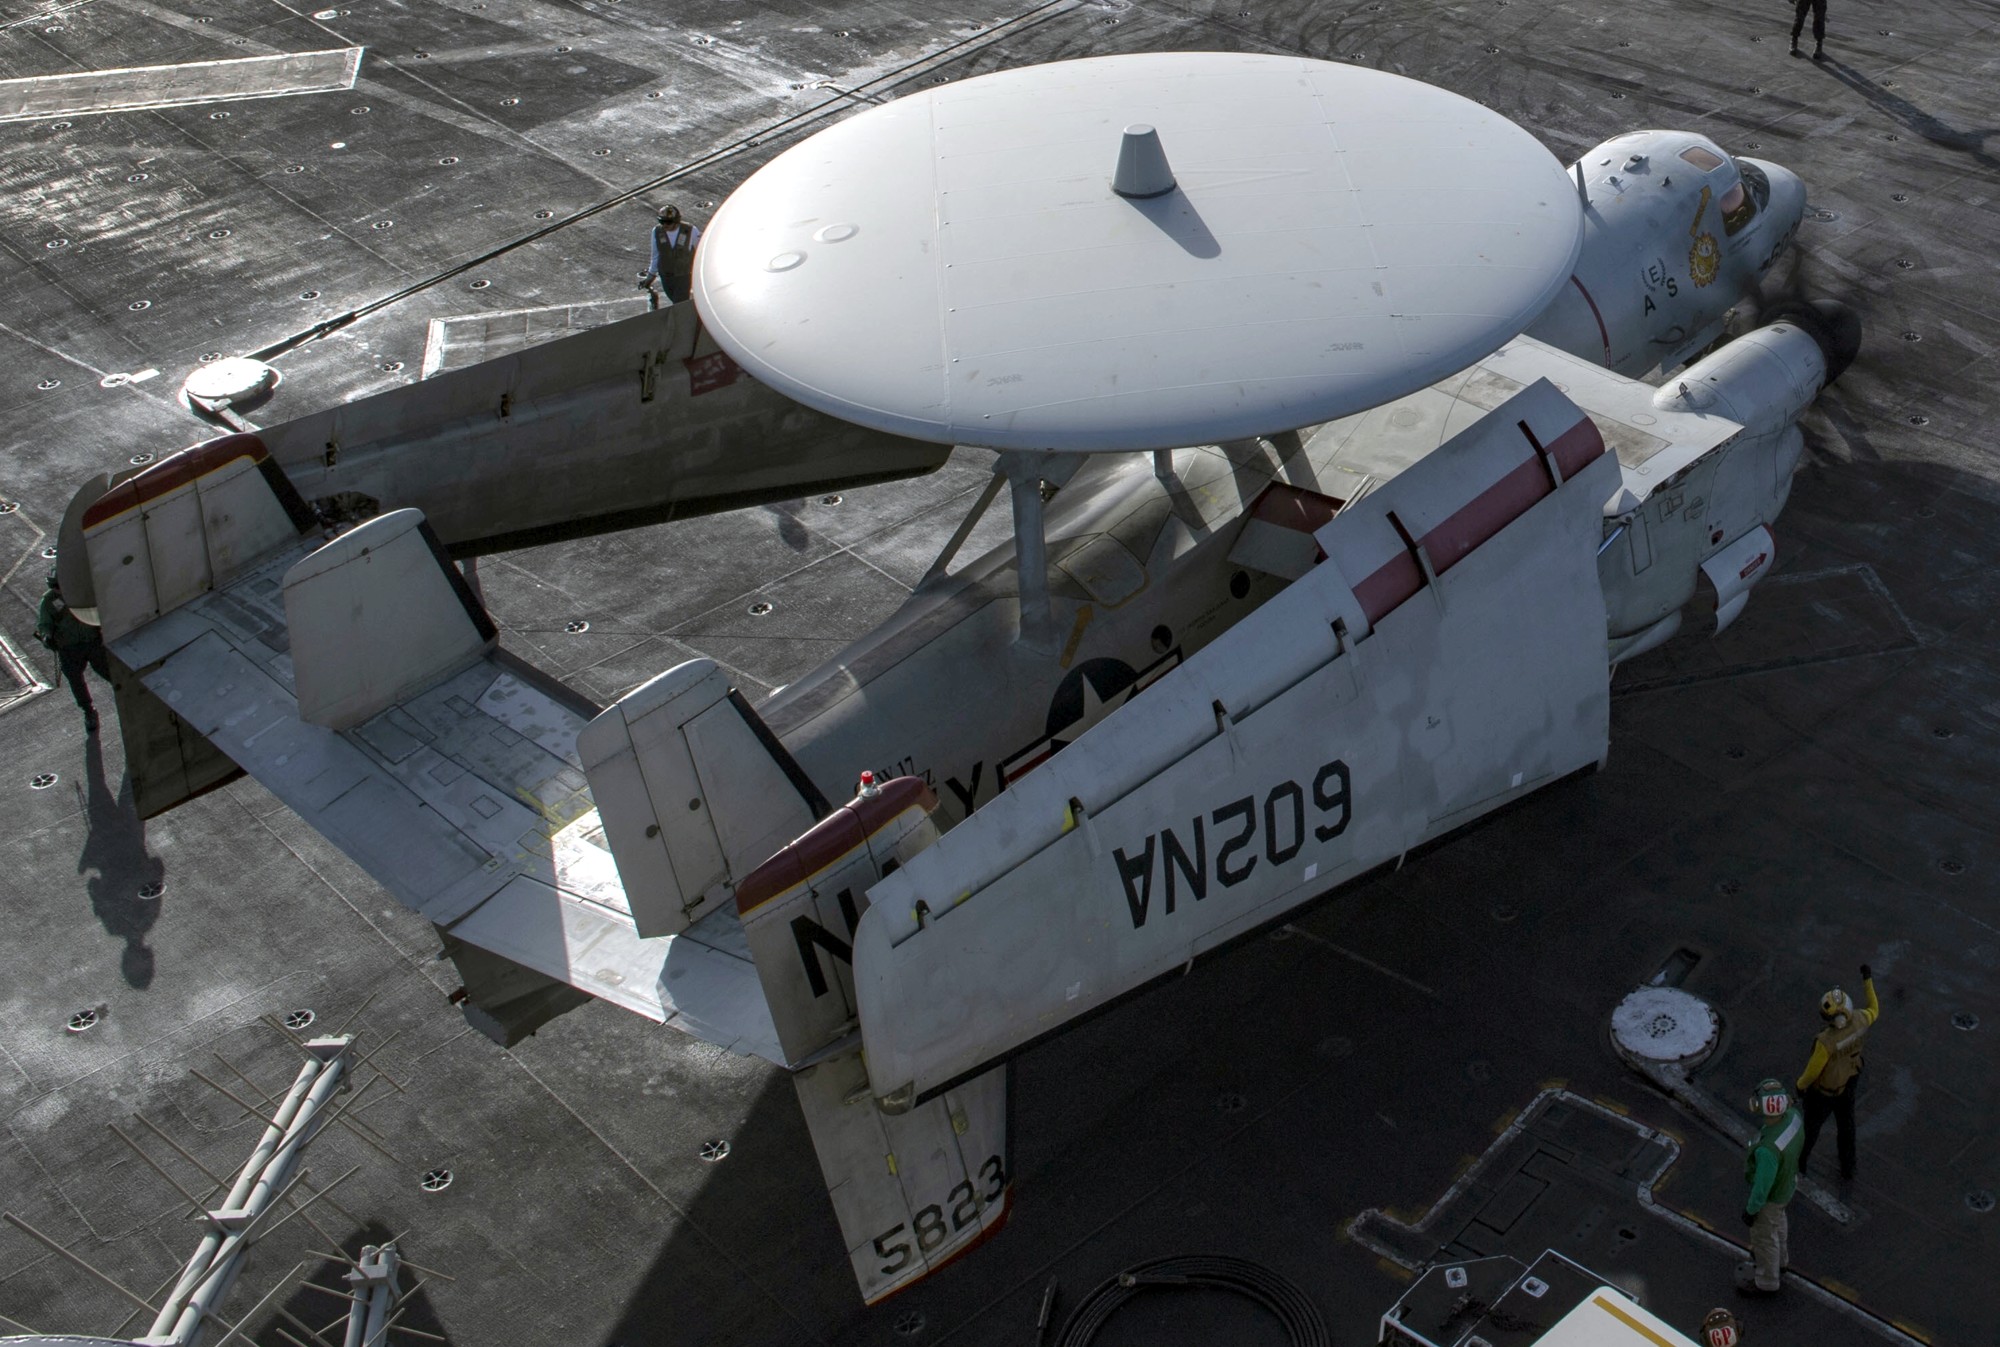 vaw-116 sun kings airborne command control squadron carrier early warning cvw-17 uss nimitz cvn-68 99